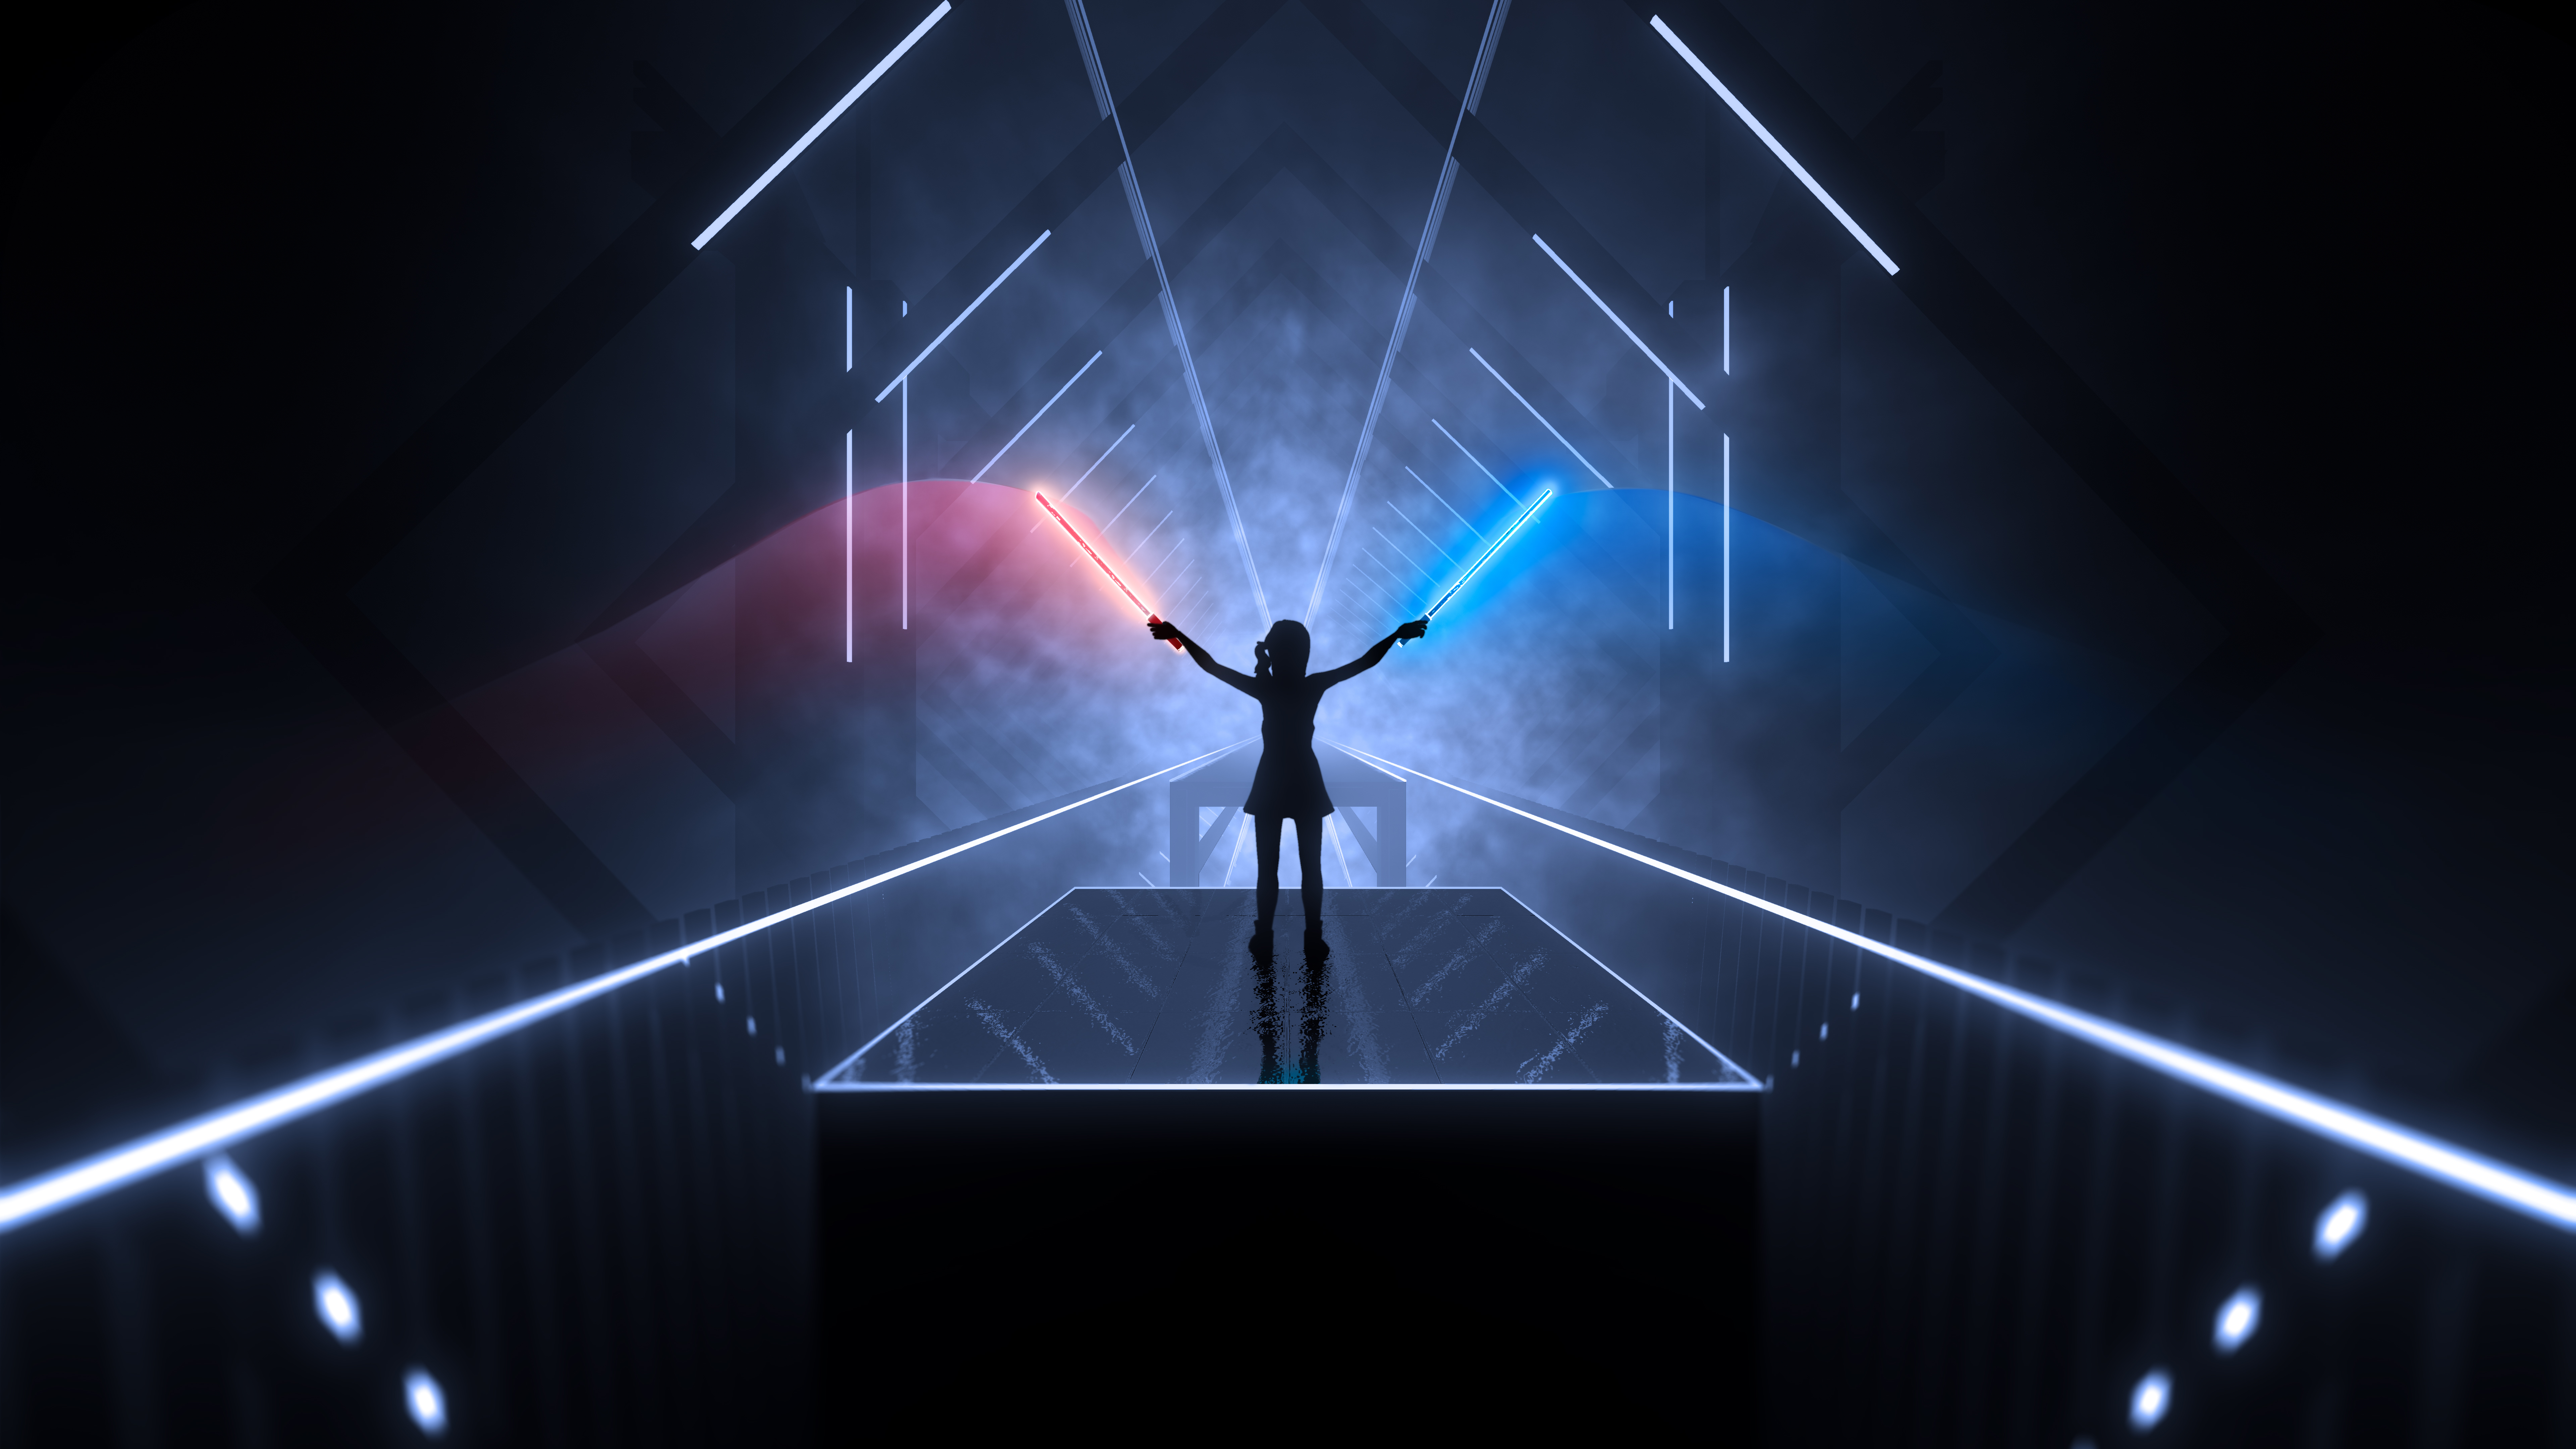 Beat Saber Vr Game Wallpaper Hd Games 4k Wallpapers Images Photos And Background